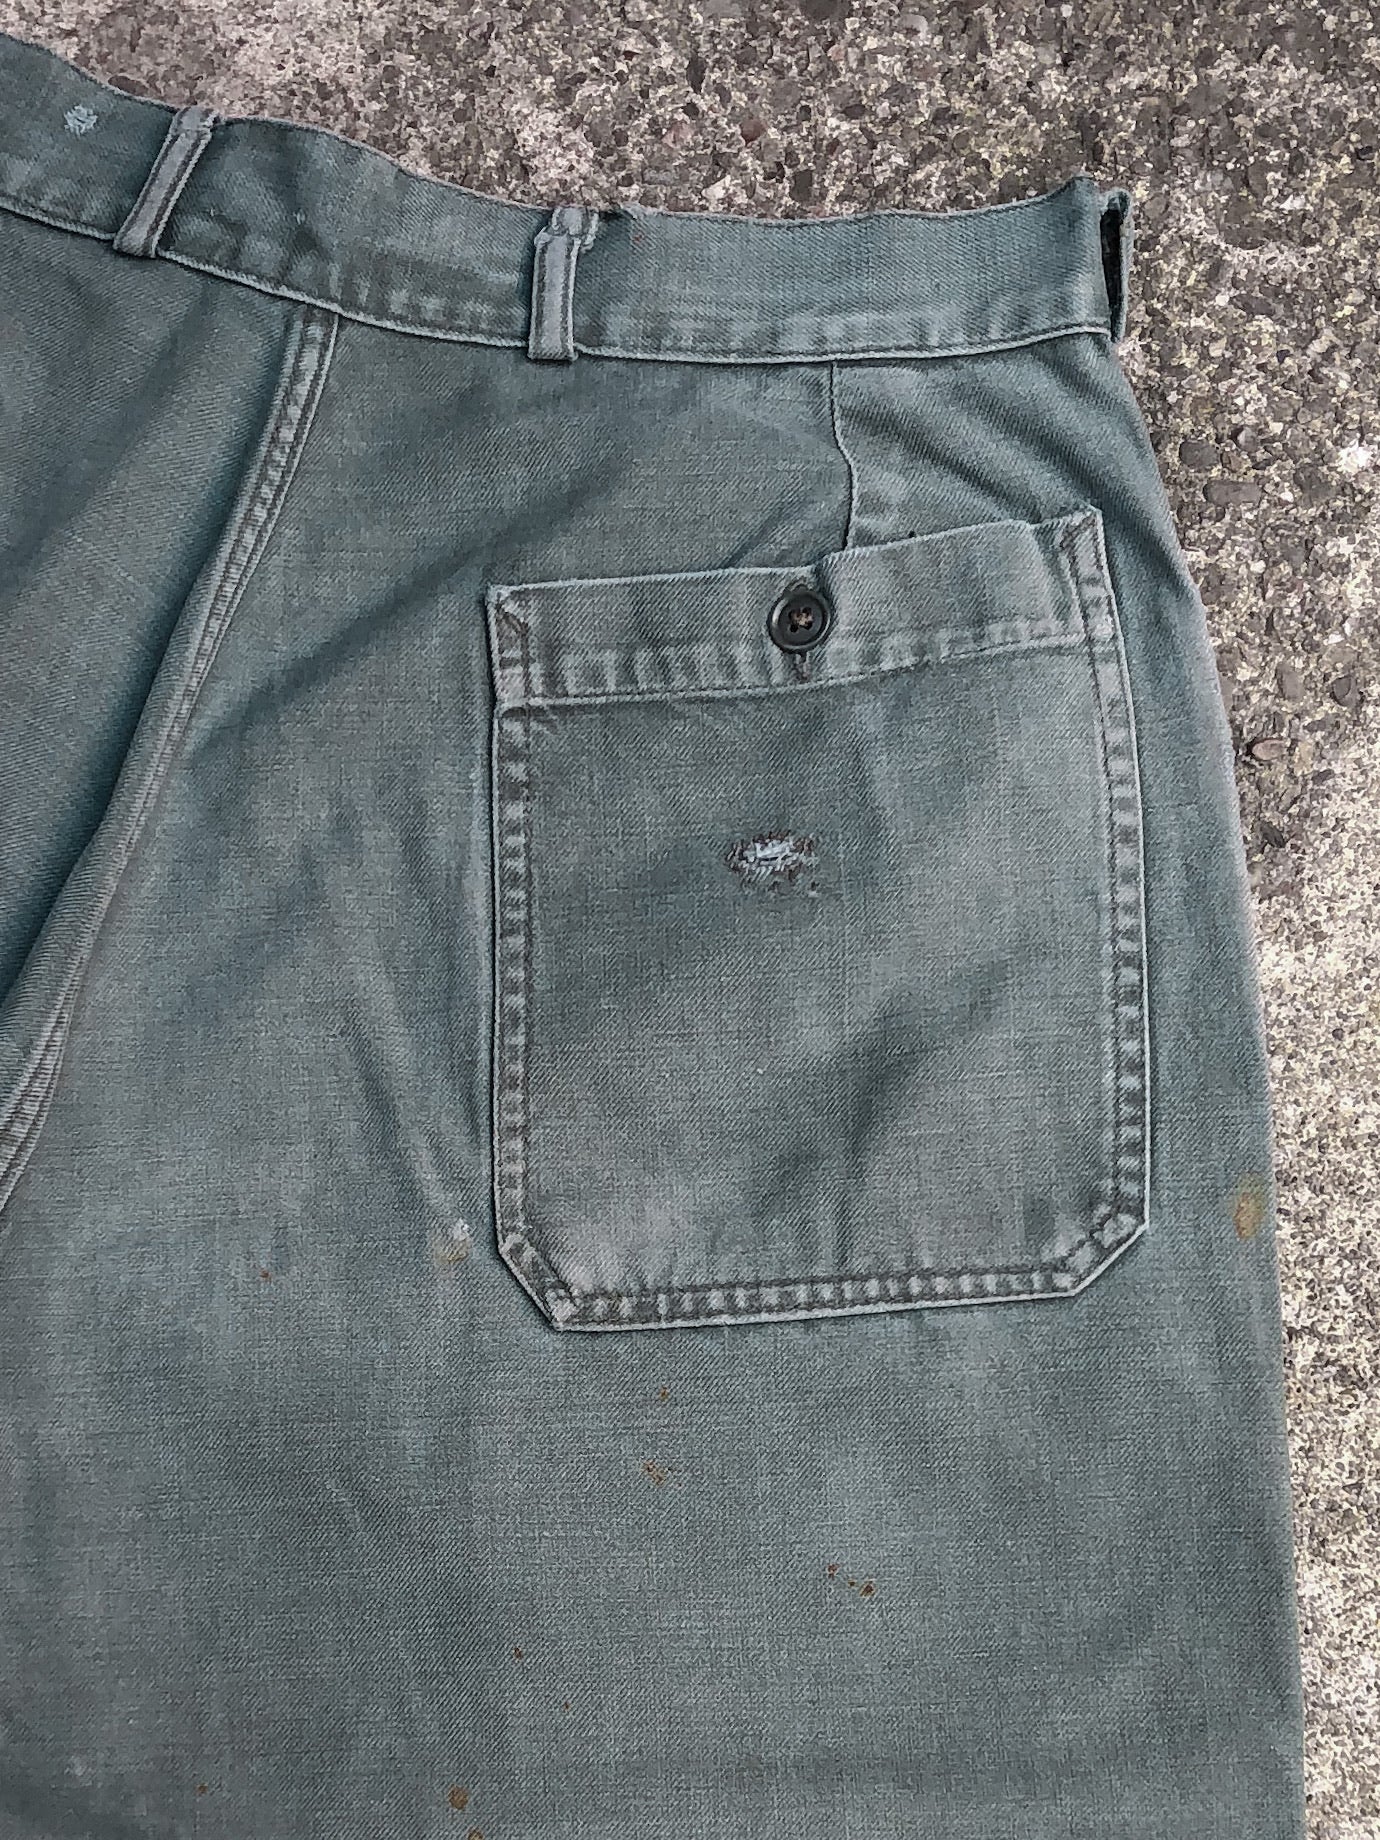 1950s Algerian War Era Repaired Faded Green French Work Pants (30X26)